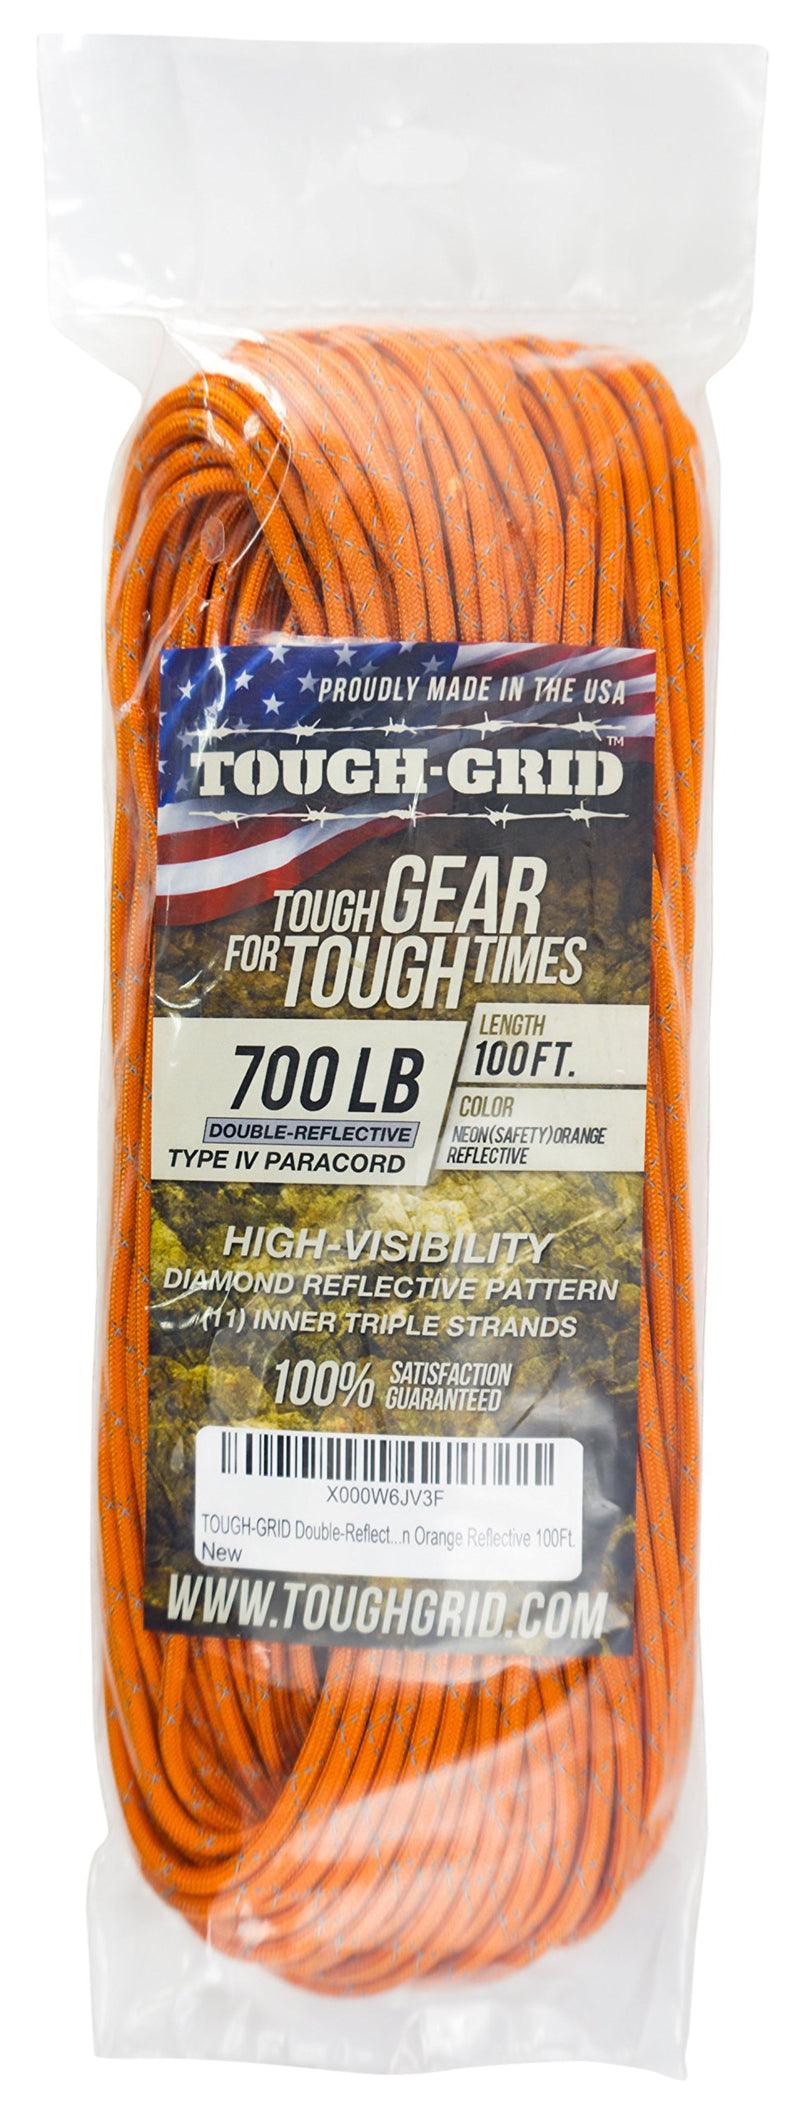 [AUSTRALIA] - TOUGH-GRID New 700lb Double-Reflective Paracord/Parachute Cord - 2 Vibrant Retro-Reflective Strands for The Ultimate High-Visibility Cord - 100% Nylon - Made in USA. Neon (Safety) Orange Reflective 100Ft. (COILED IN BAG) 